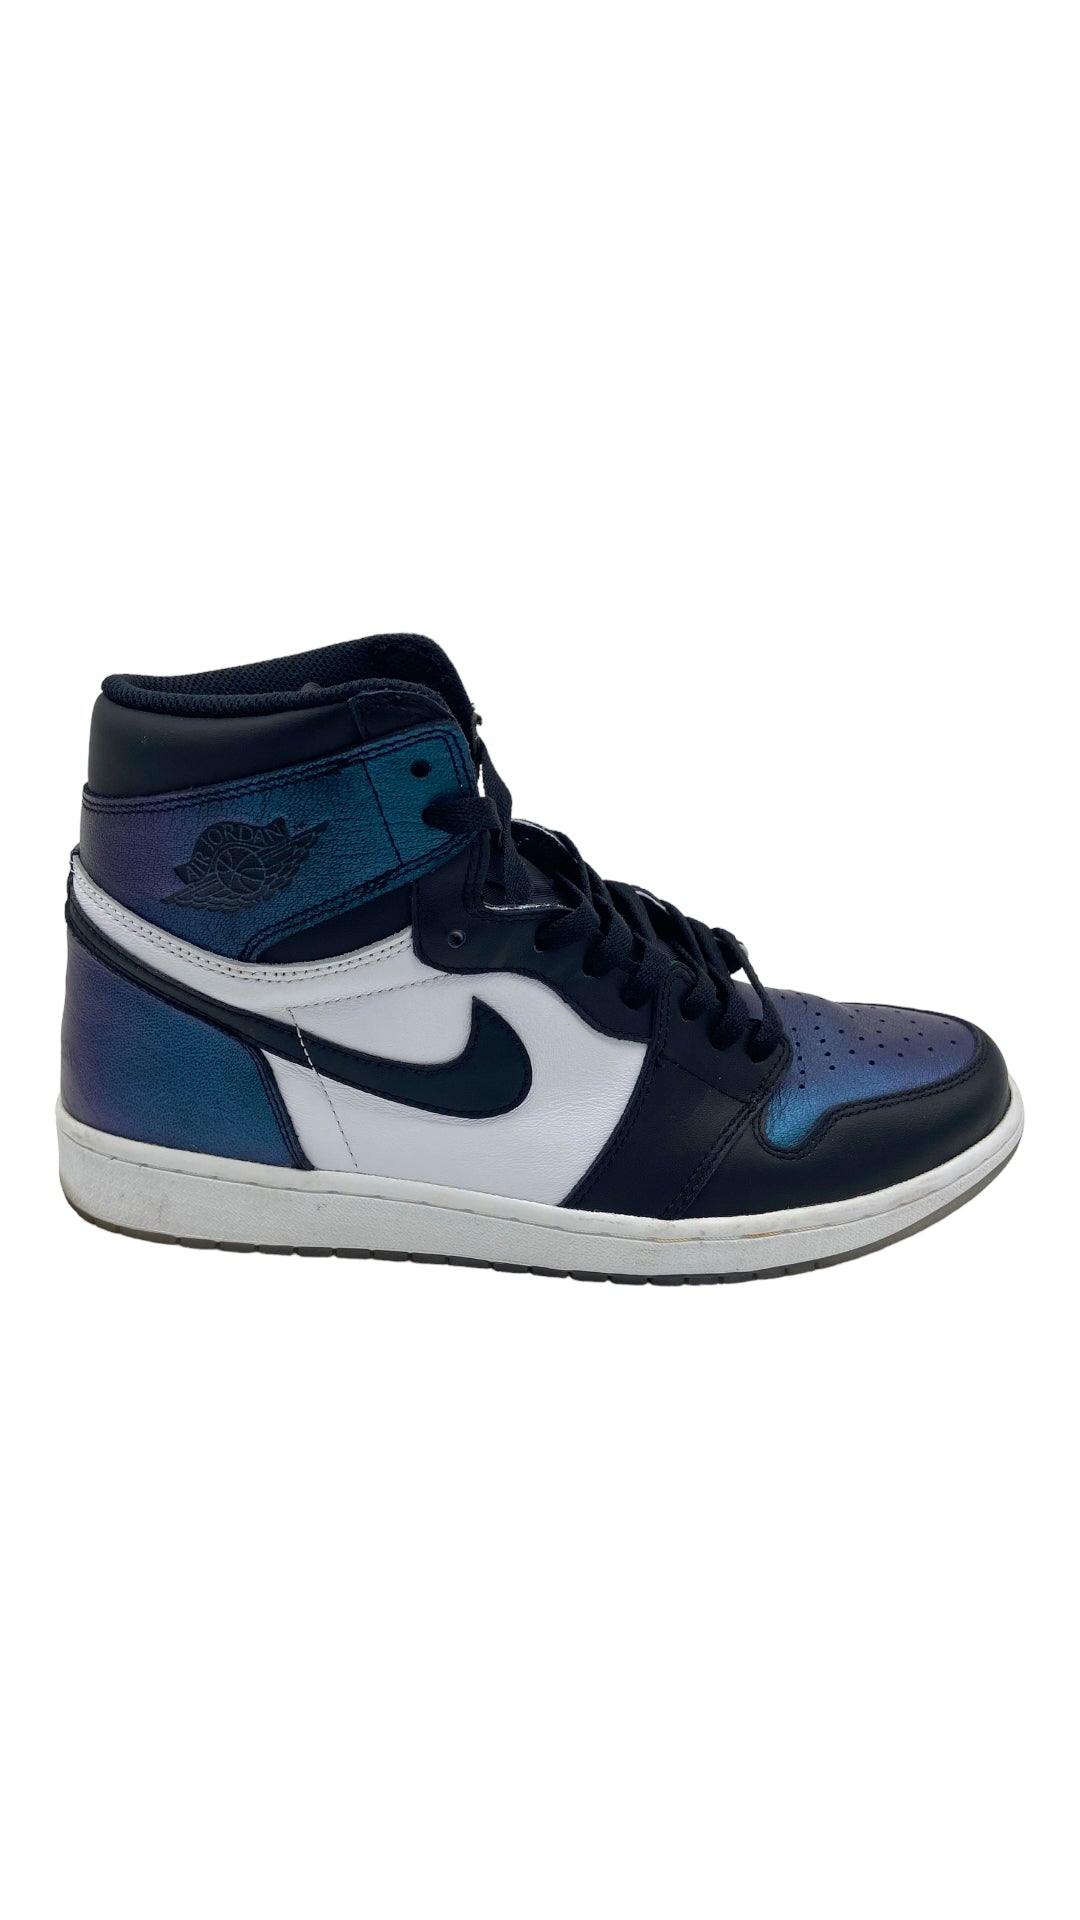 Load image into Gallery viewer, Preowned Jordan 1 Retro All-Star Chameleon (2017) Sz 12
